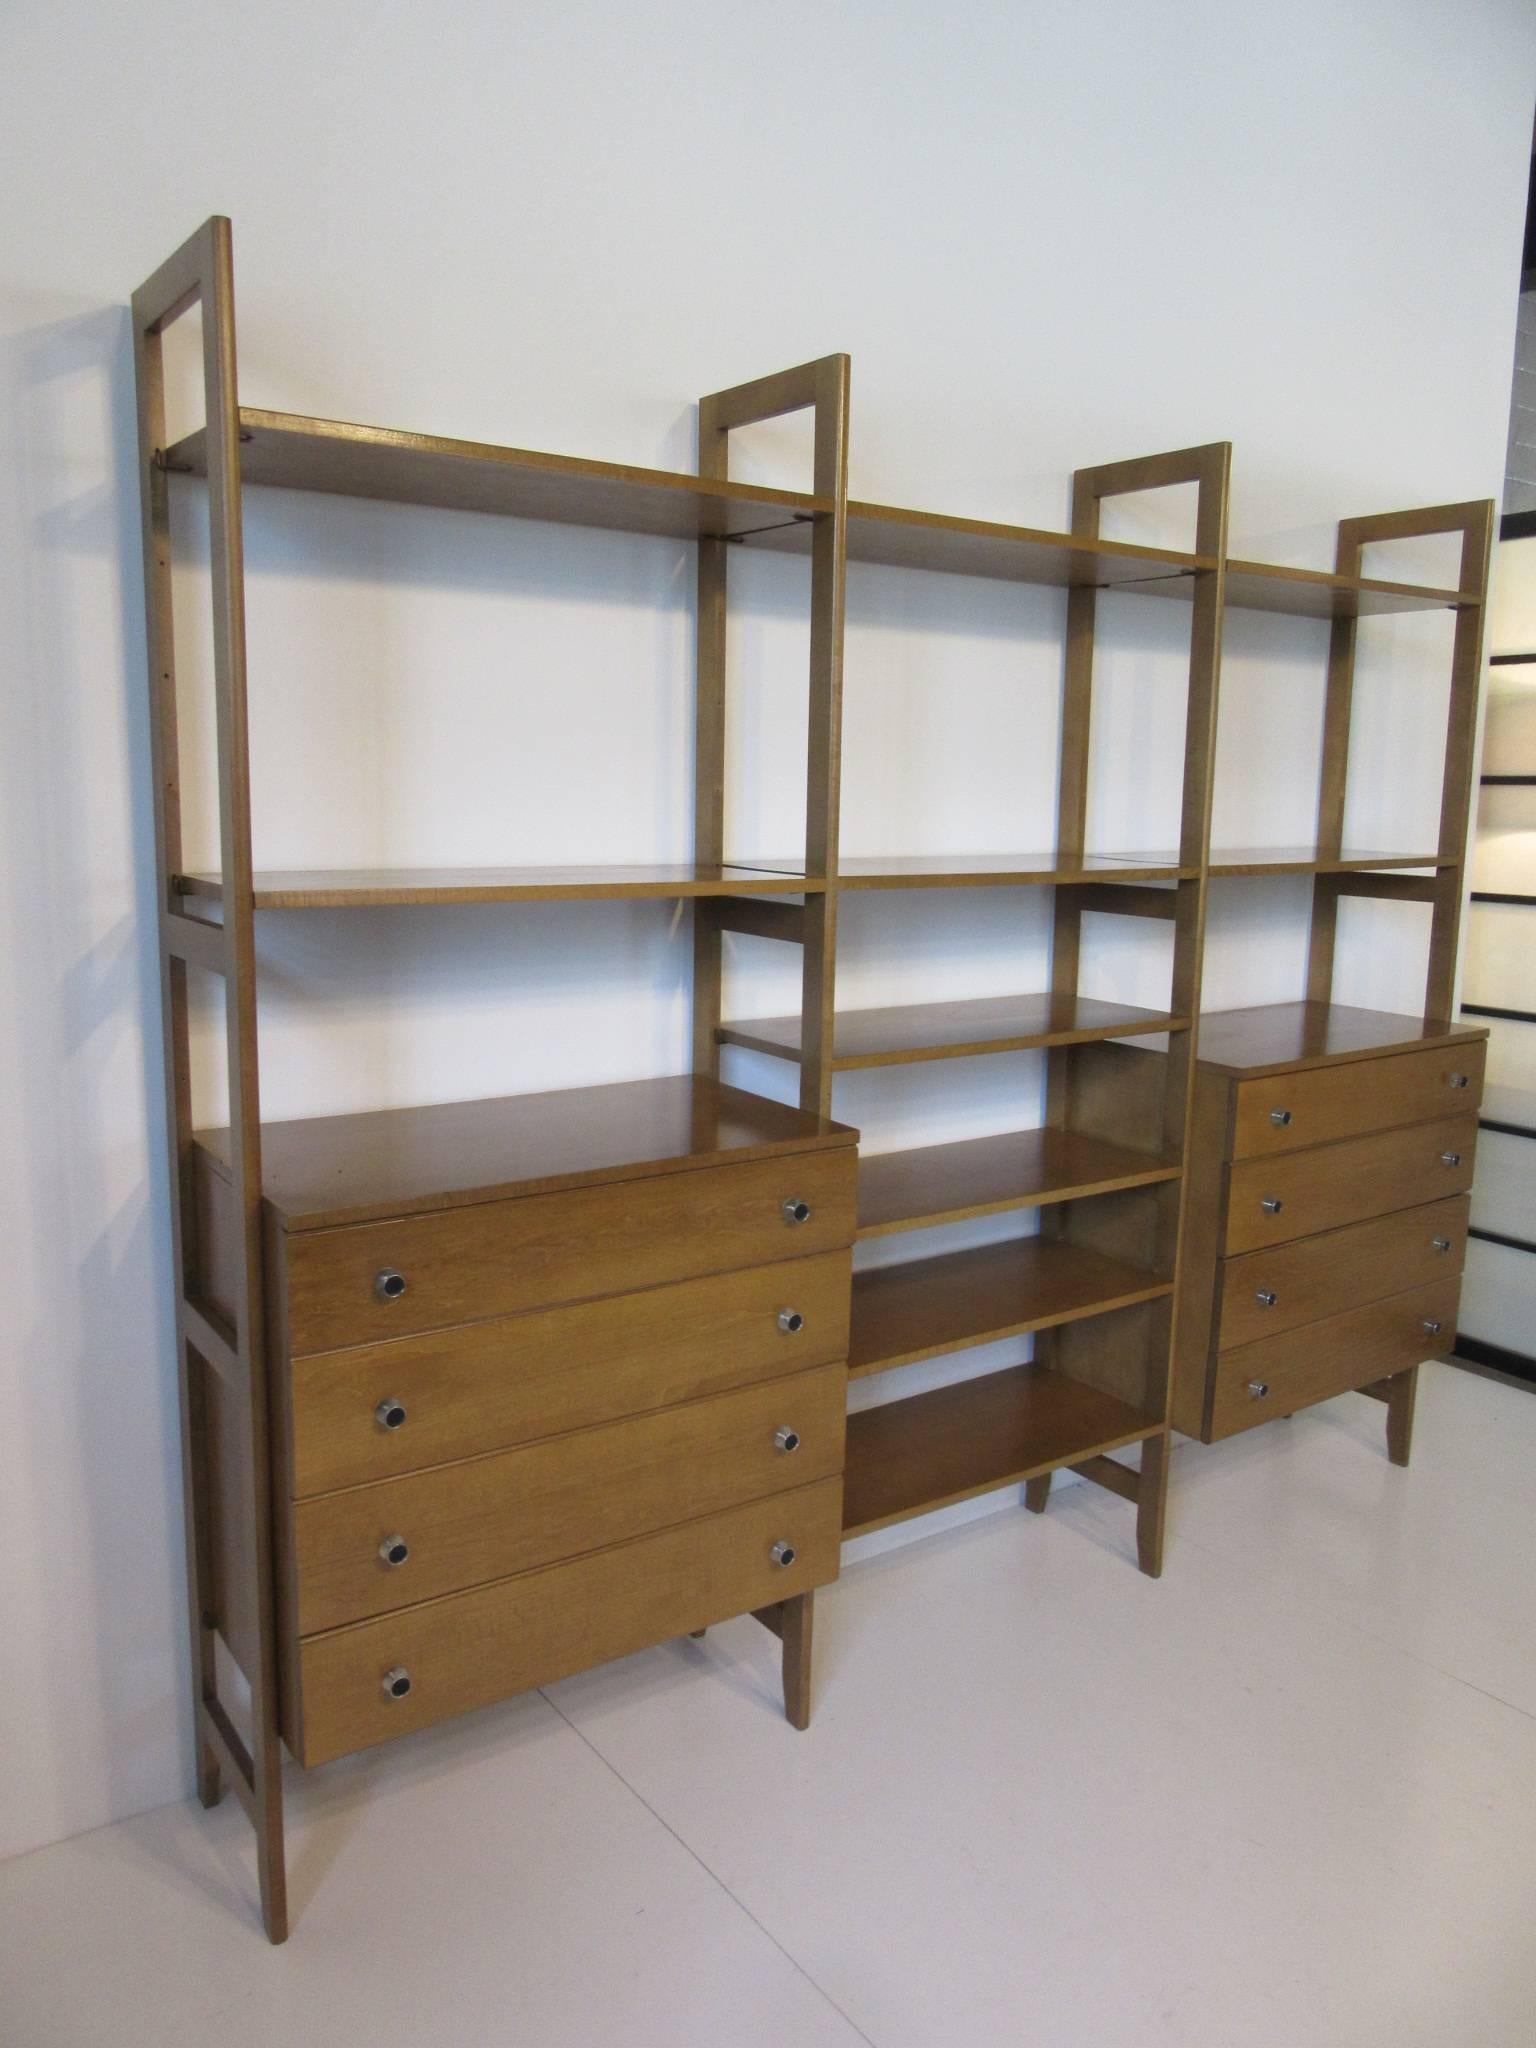 A freestanding with no wall attachment storage system in the style of the Cado units with three bays , two four drawer chests , chrome pulls and ten shelves, all adjustable to fit your needs . Easy set up and very sturdy this is a great piece for